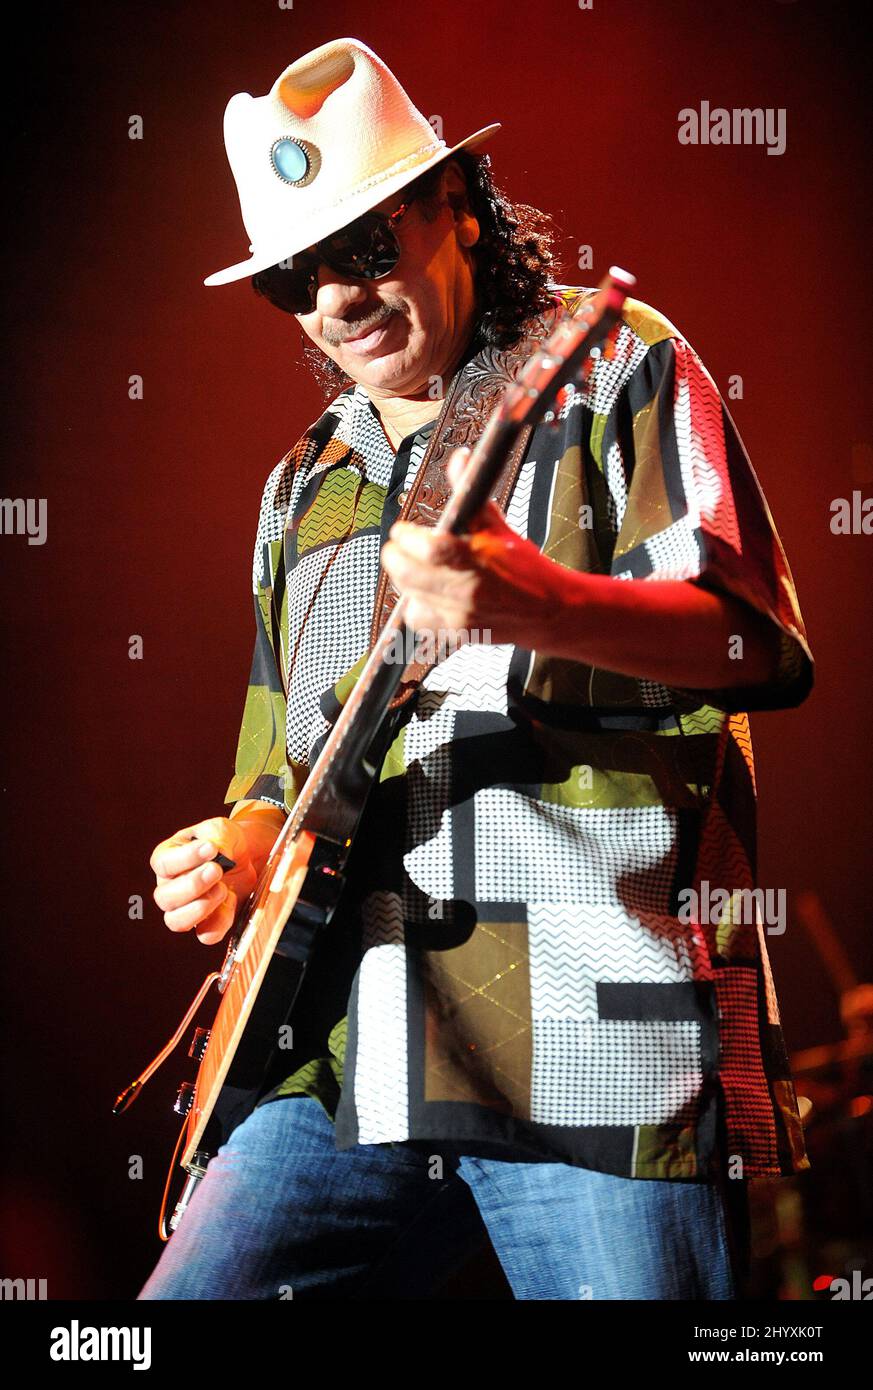 Carlos Santana ' performs as part of the 'Universal Tone Tour 2010' concert  held at the Time Warner Cable Music Pavilion in Raleigh, North Carolina  Stock Photo - Alamy